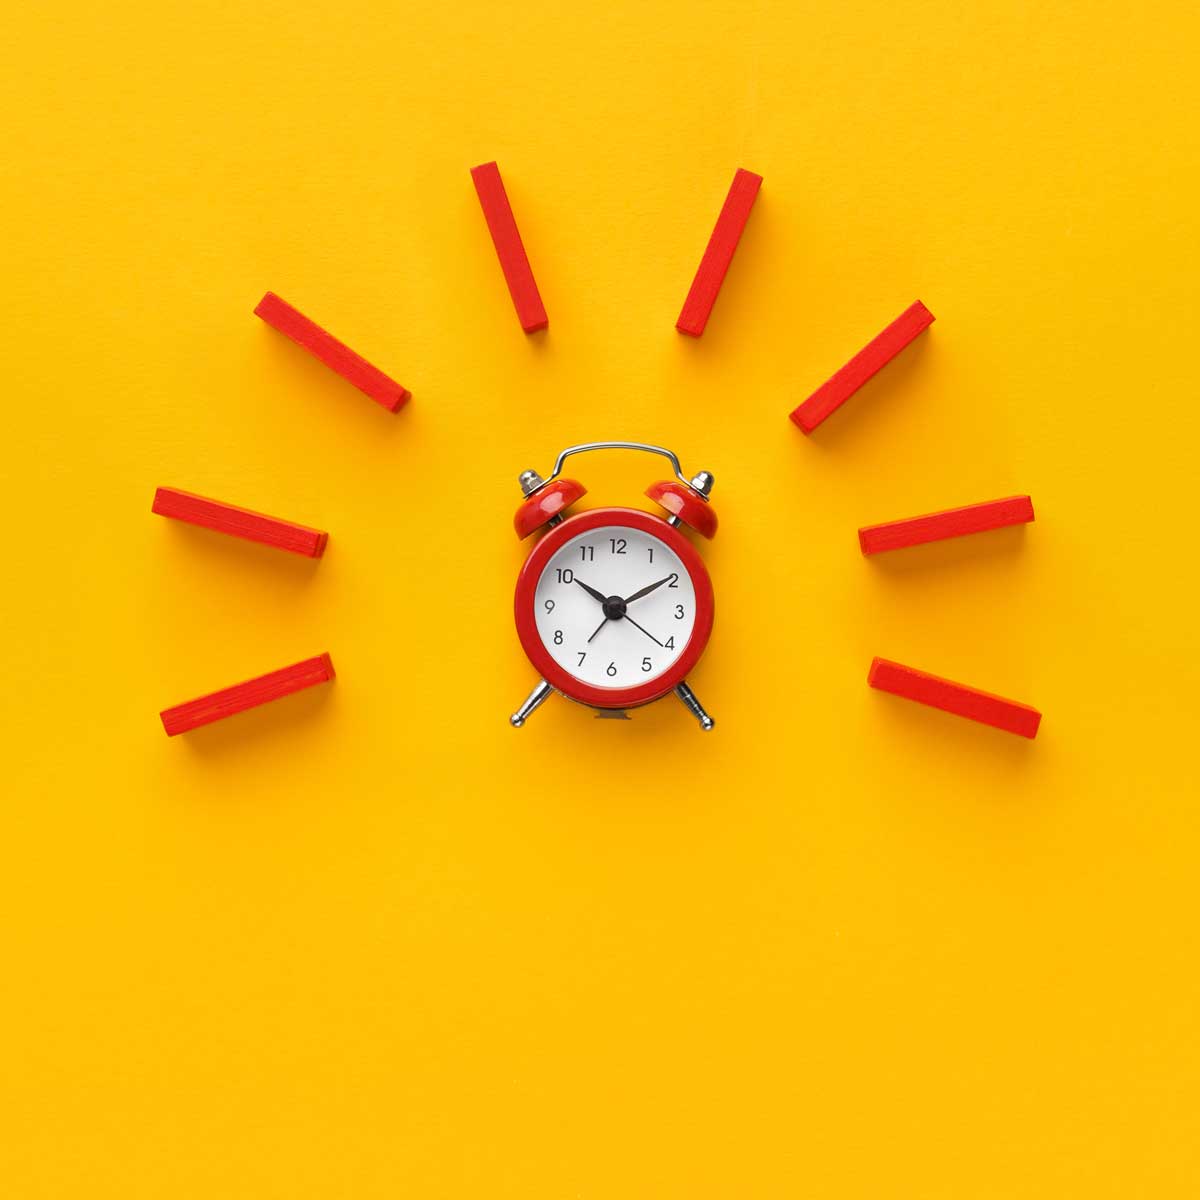 reminder-and-approaching-deadline-imagery.-Alarm-clock-with-red-dominoes-on-yellow-background